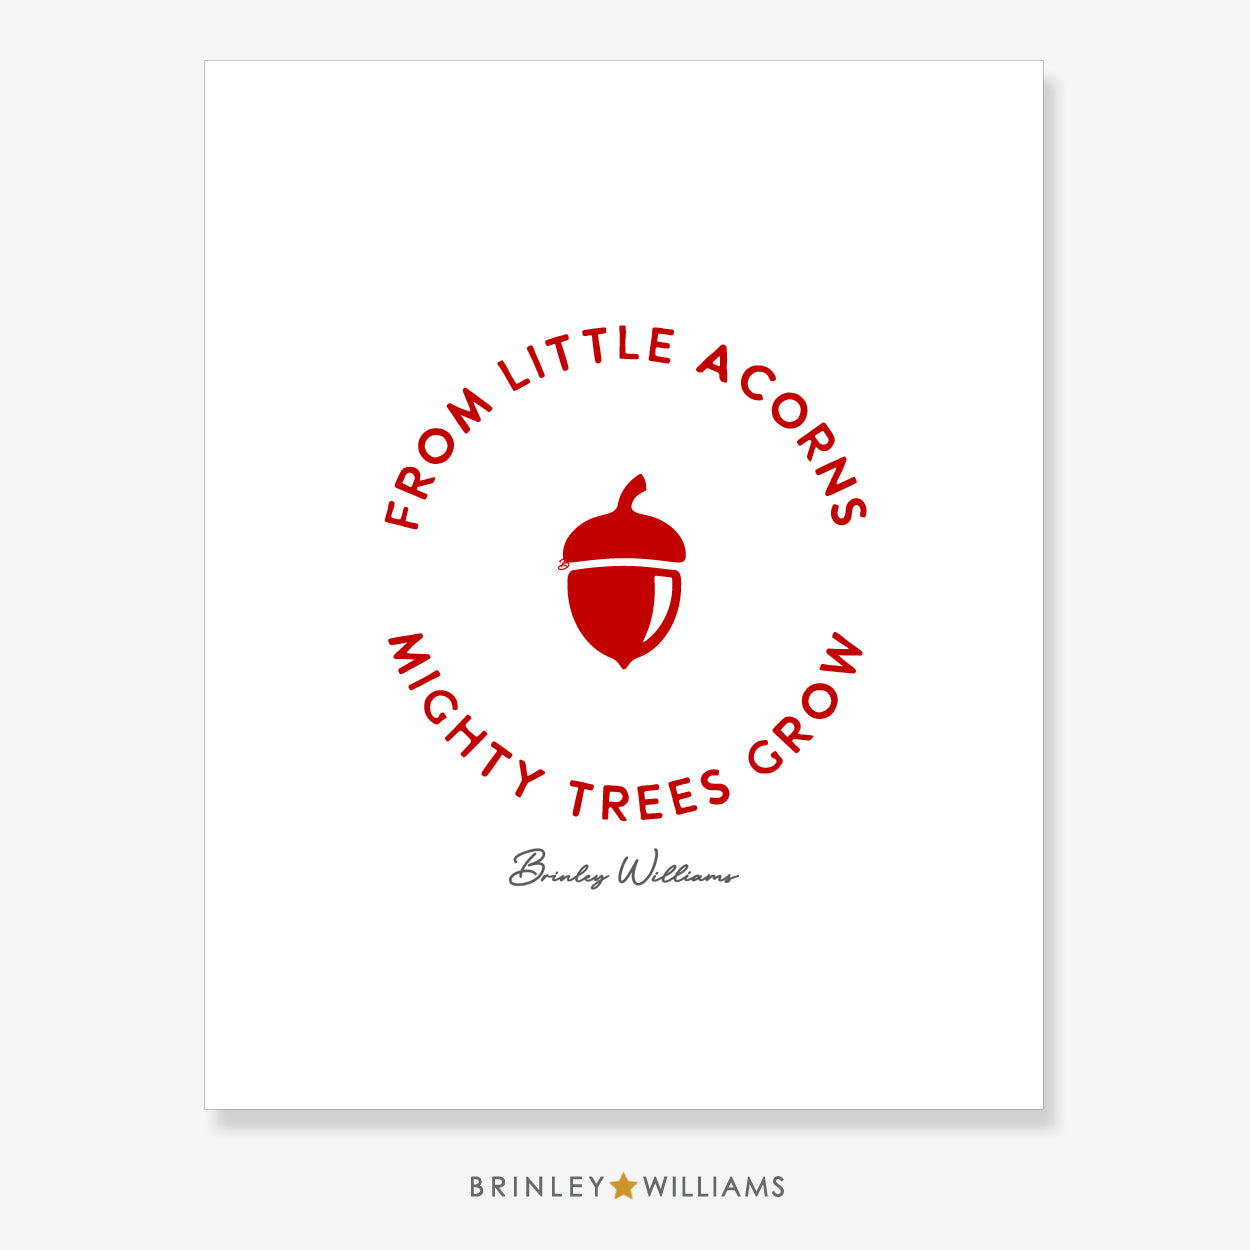 From little acorns mighty trees grow Wall Art Poster - Red